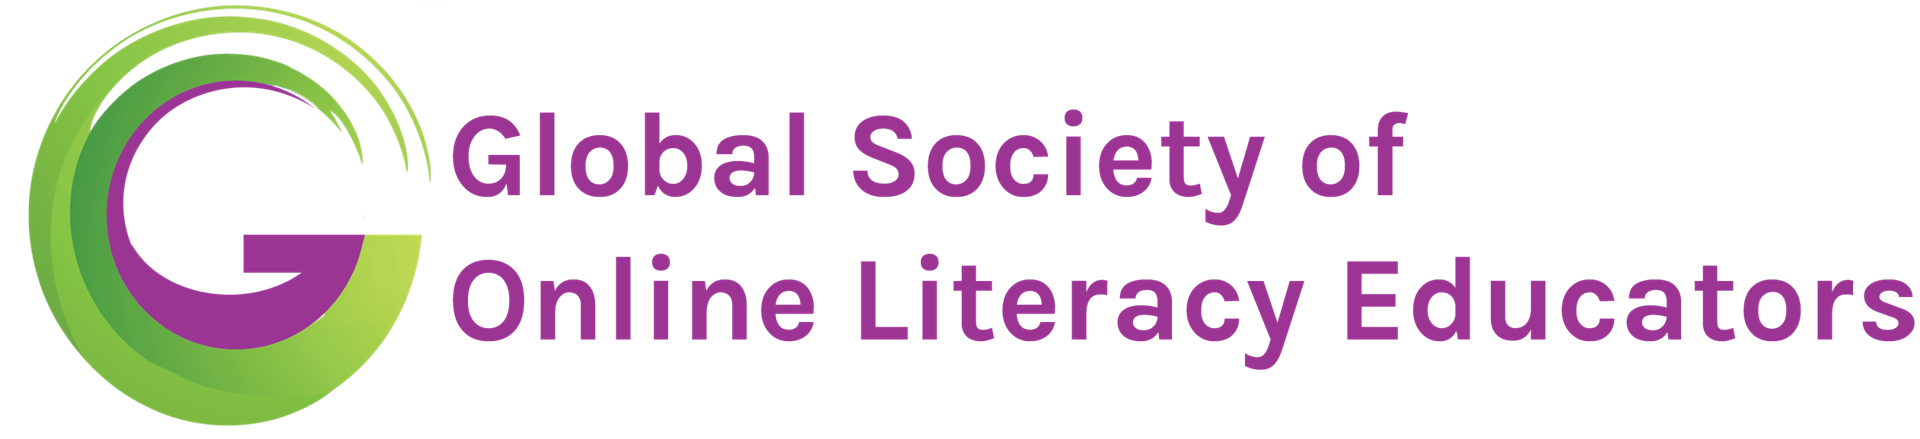 Stylized green and purple 'G' with "Global Society of Online Literacy Educators" in purple.